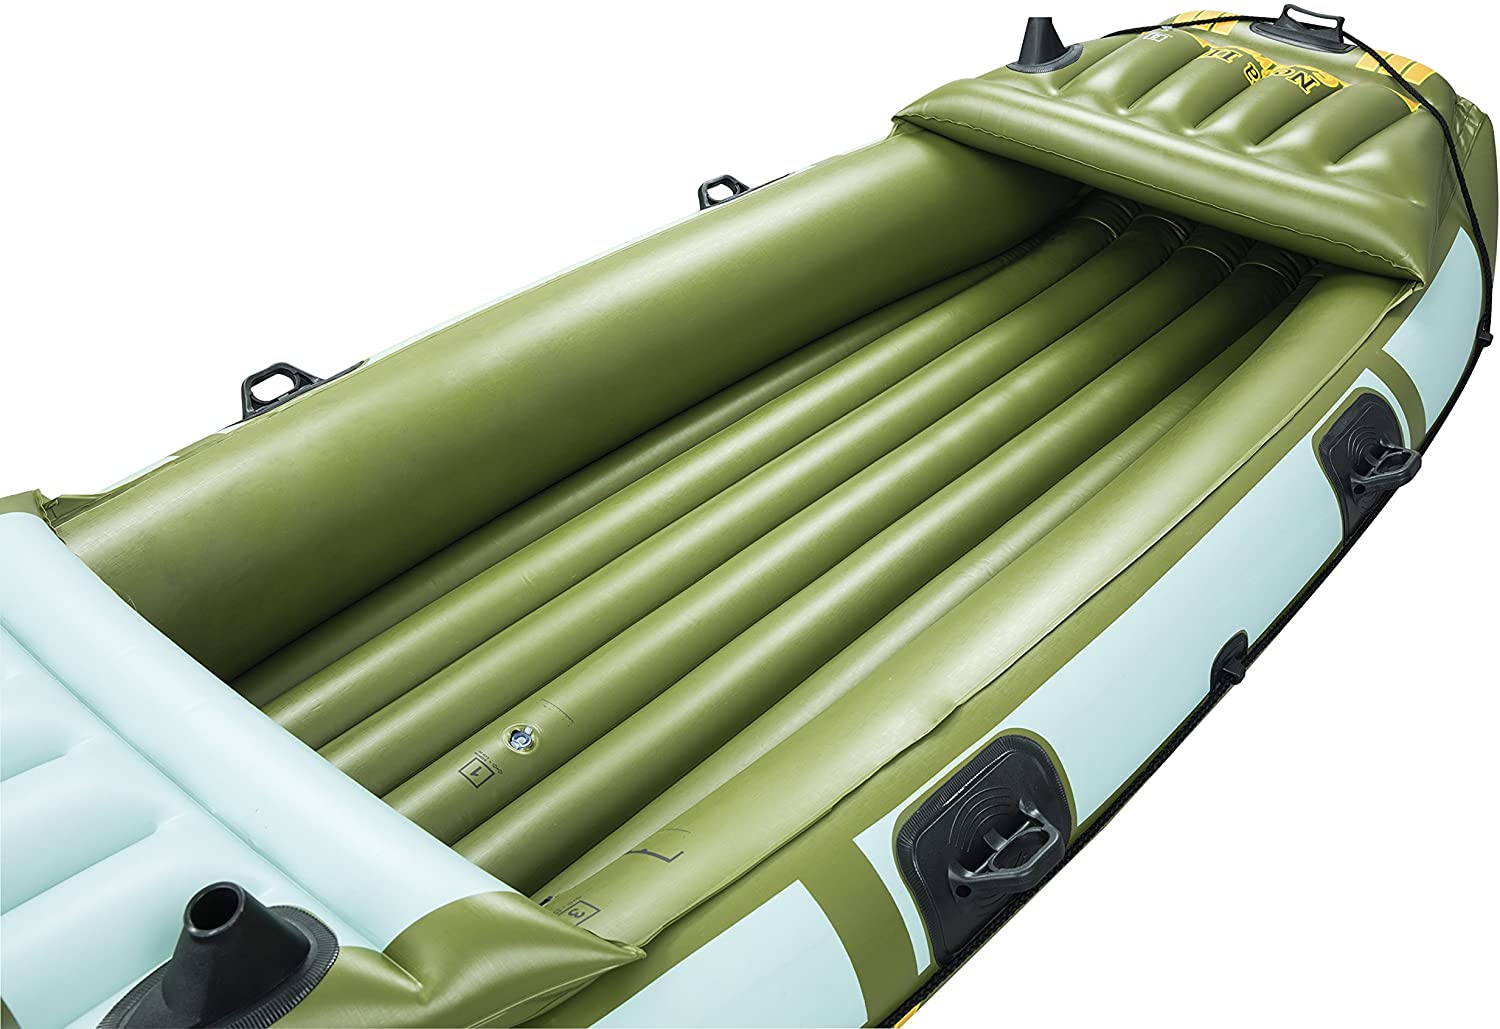 Bestway Voyager 300 2-Person Inflatable Boat - MGA STAR MARKETING 